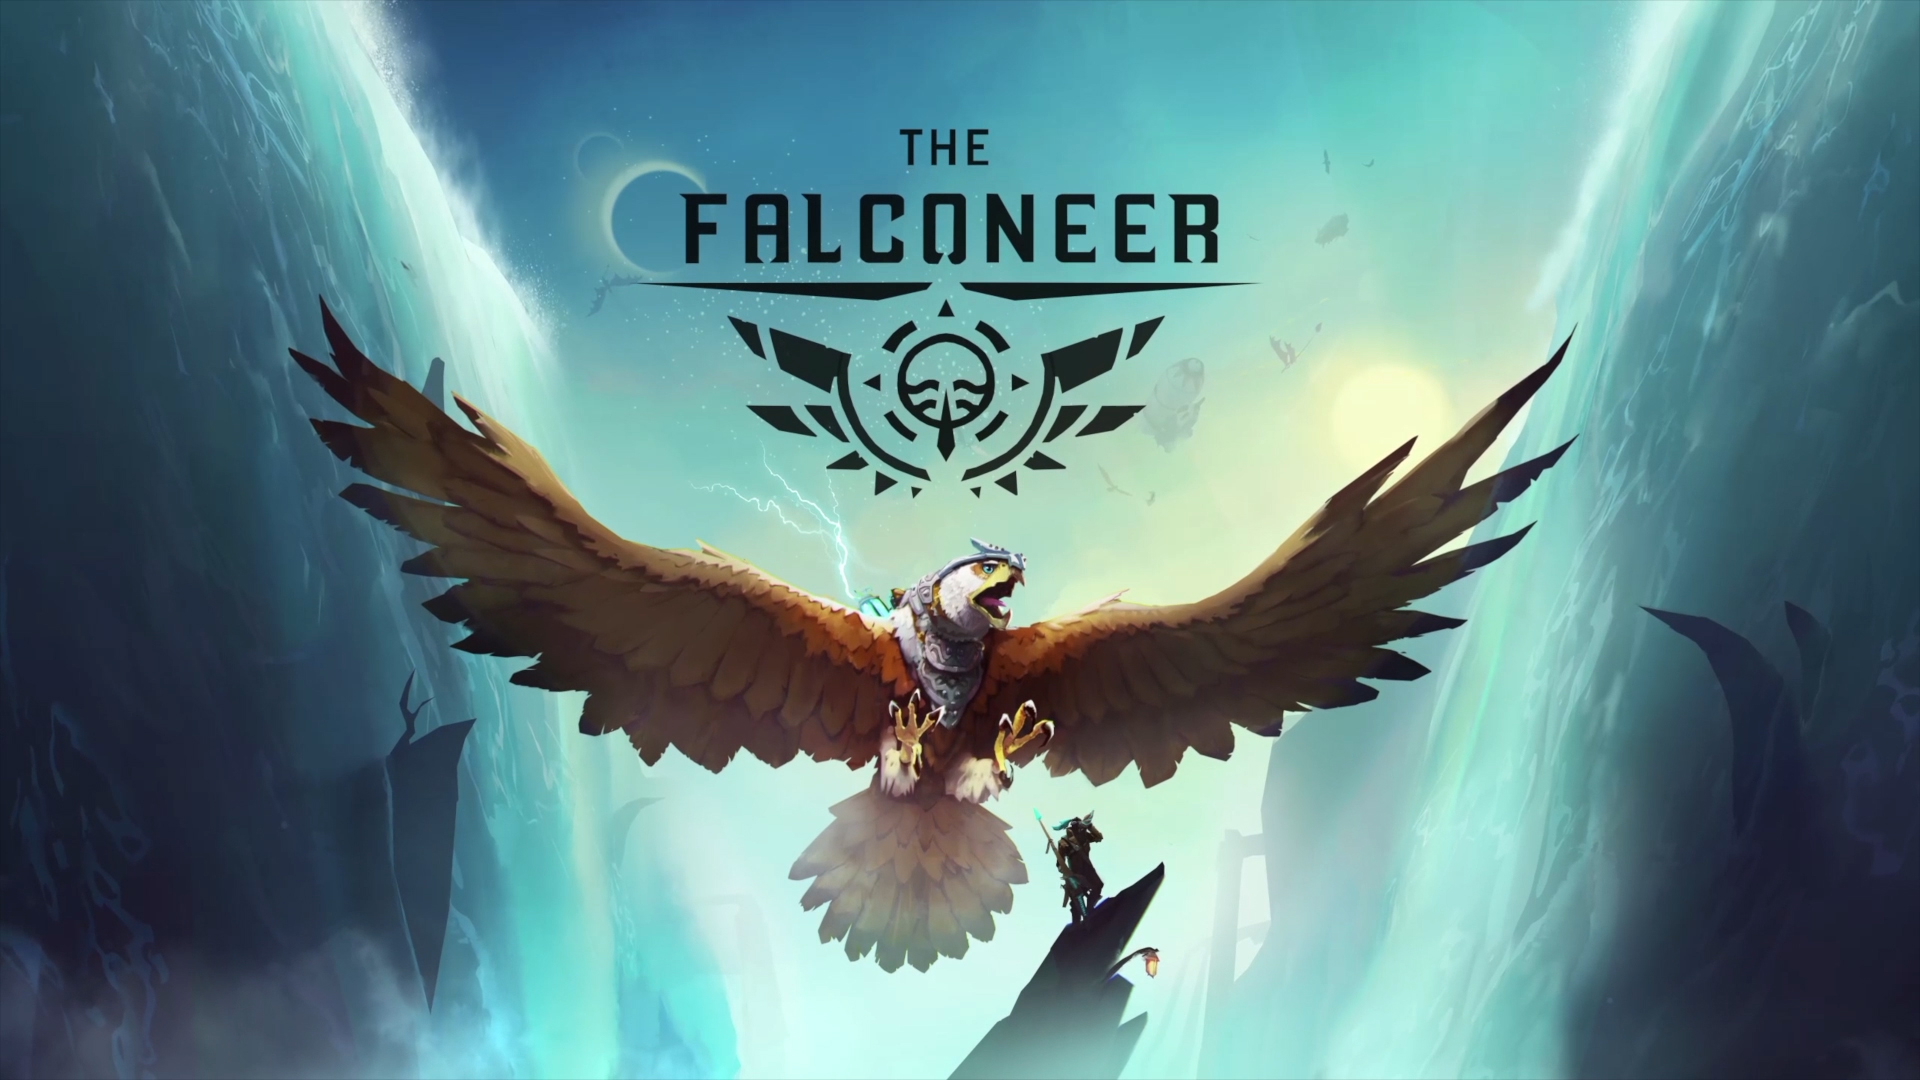 The Falconeer 2020 Wallpapers